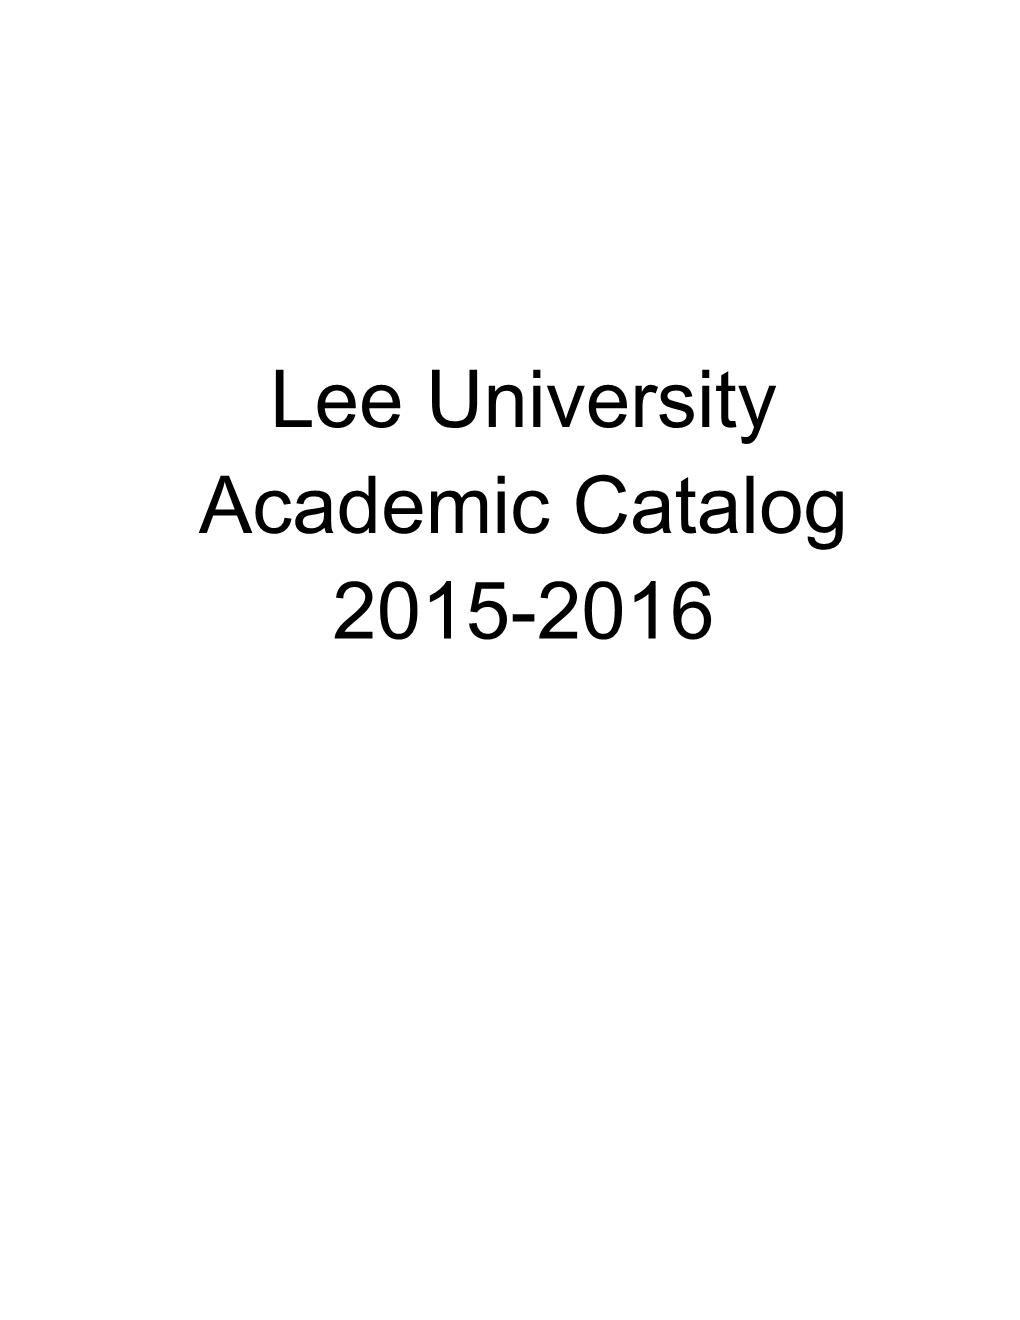 Lee University Academic Catalog 2015-2016 Table of Contents